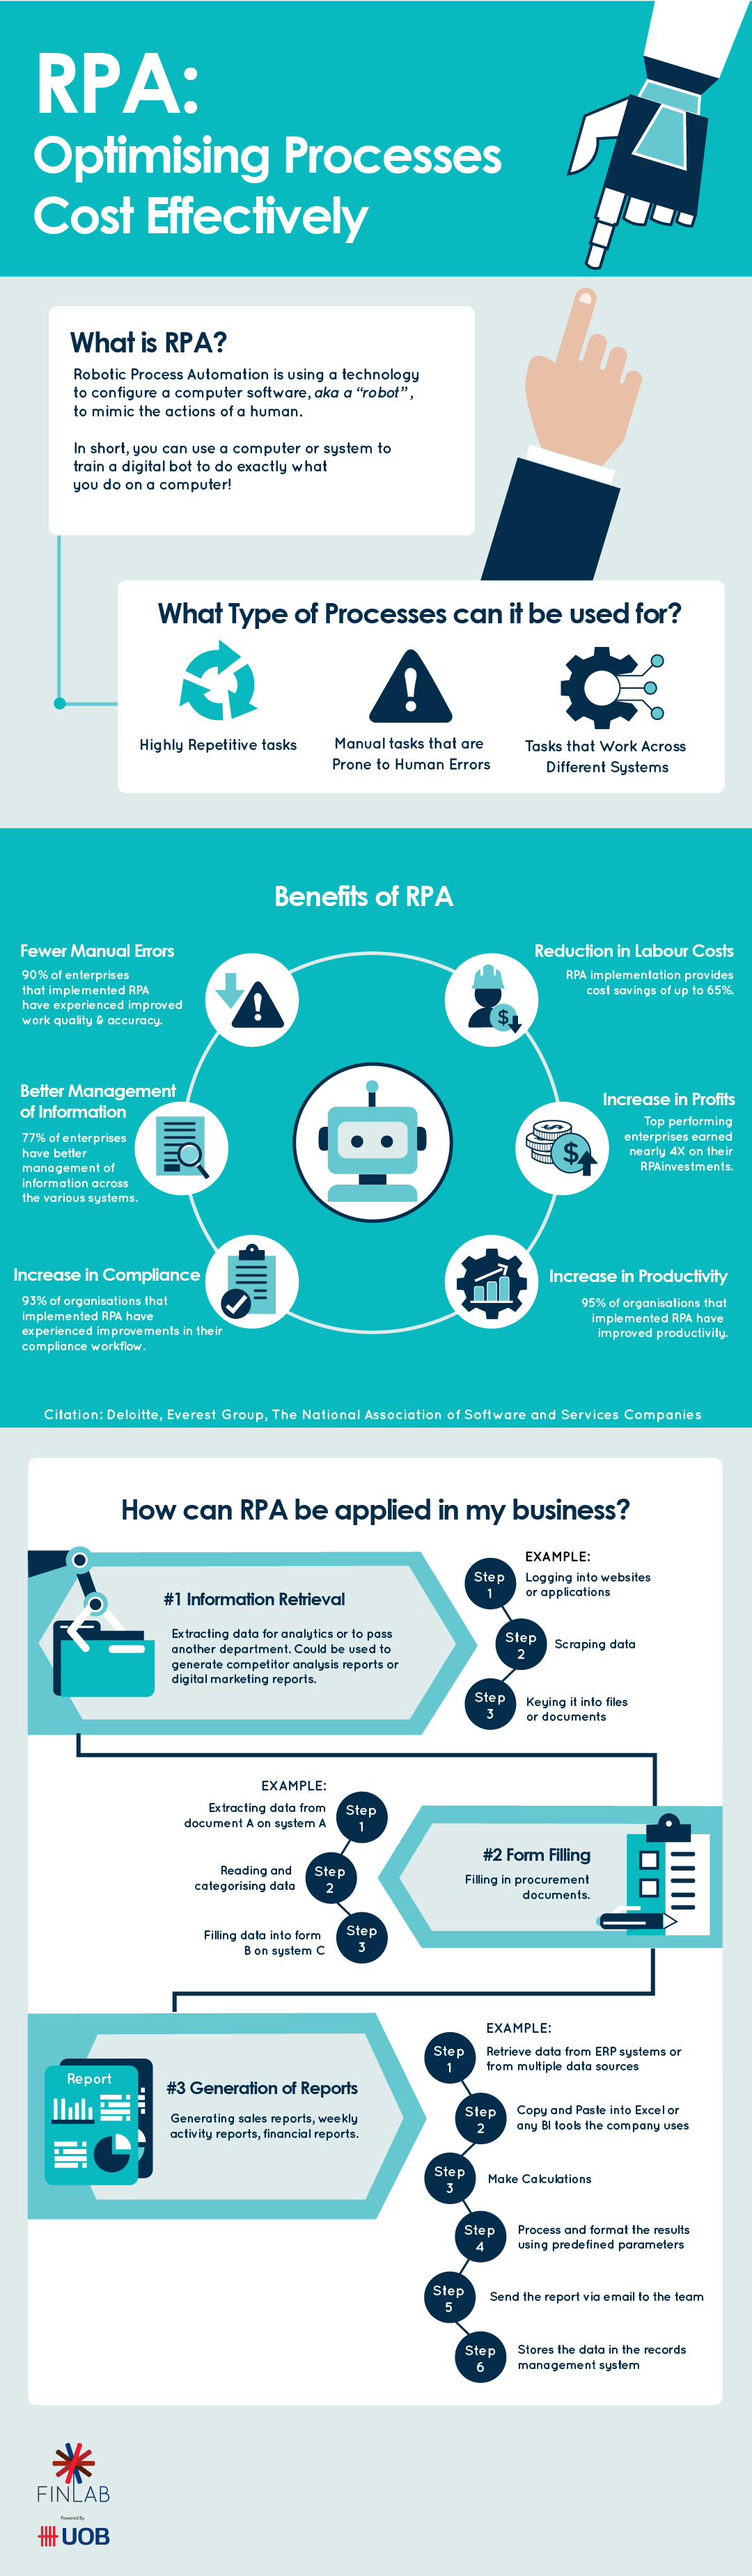 Rpa Infographic 1 2 12 01 - Rpa: Optimising Processes Cost Effectively